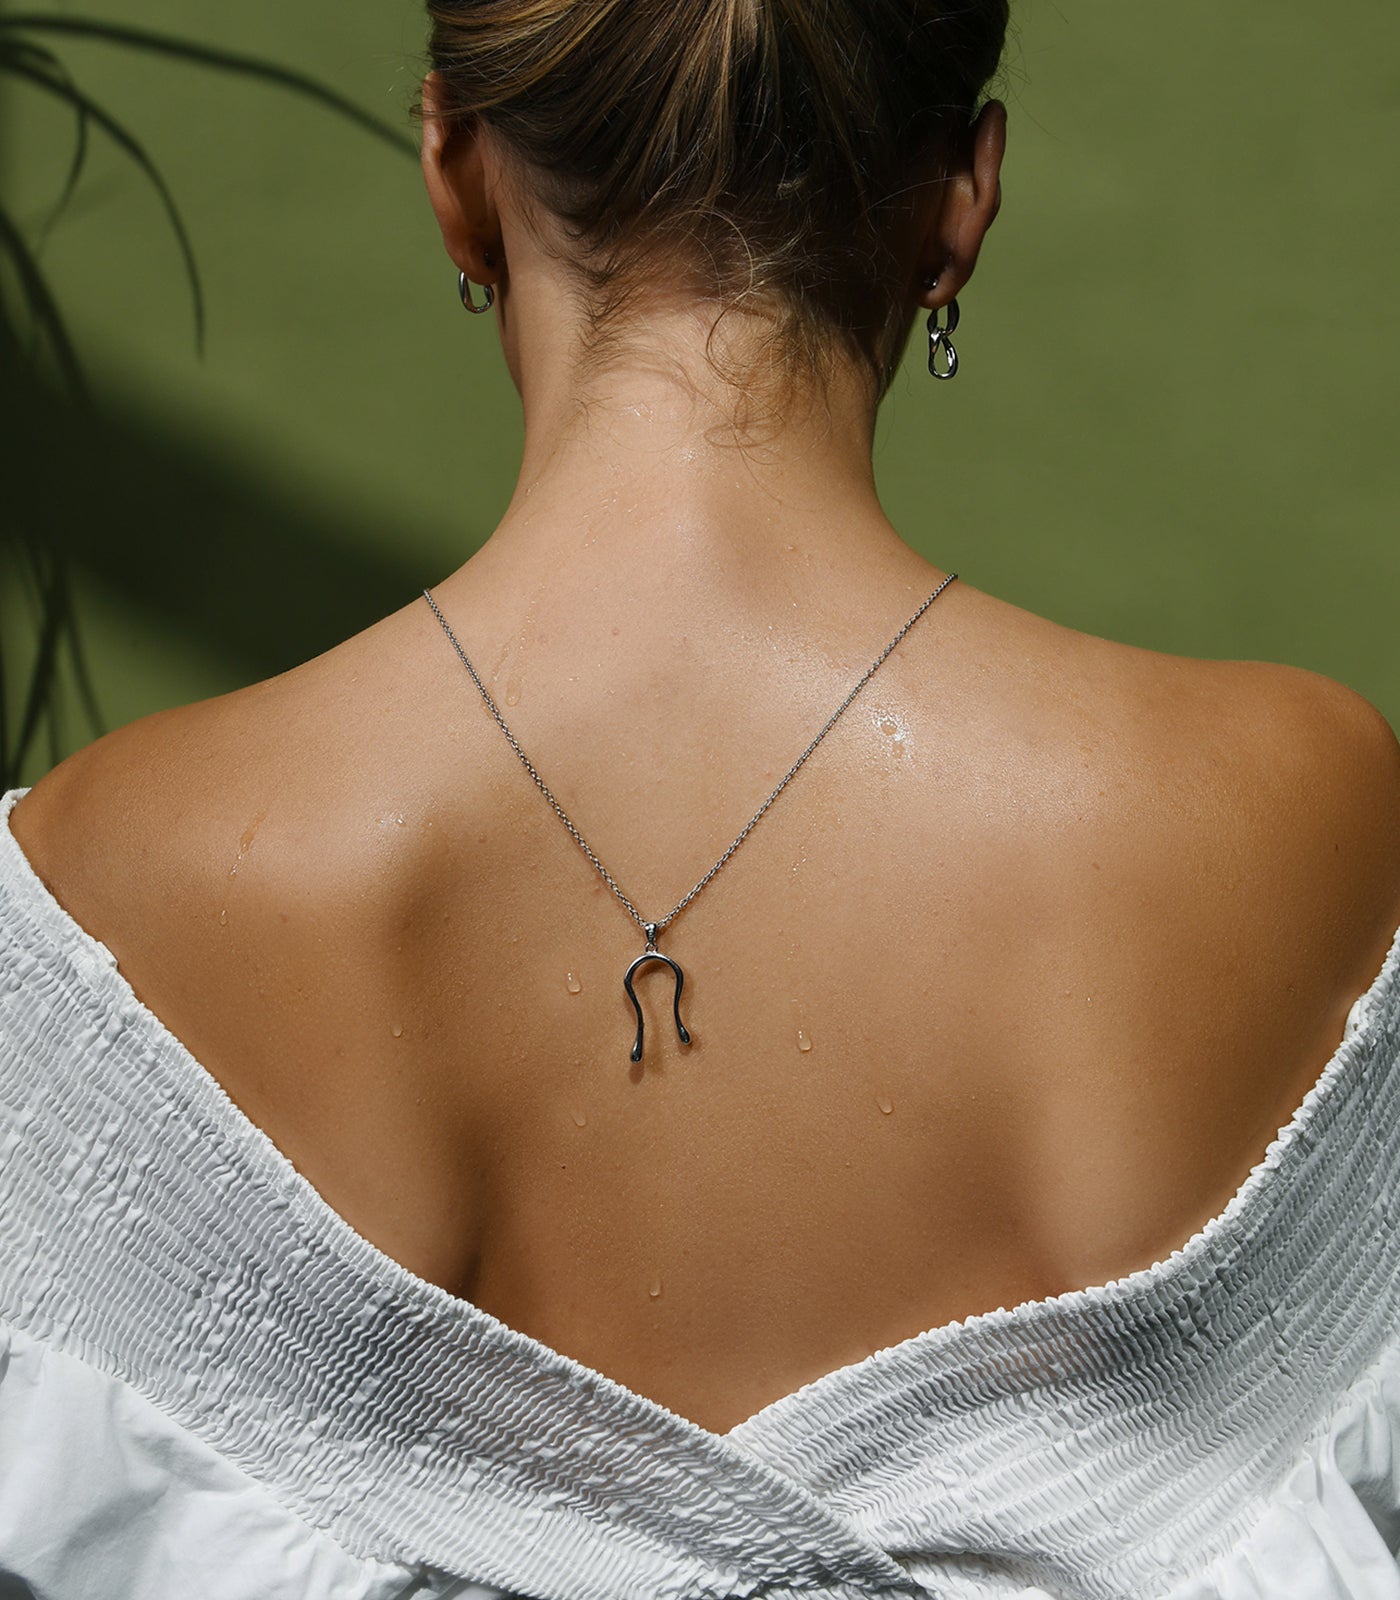 A model wears a sterling silver necklace with a liquid curve pendant which resembles water droplets.